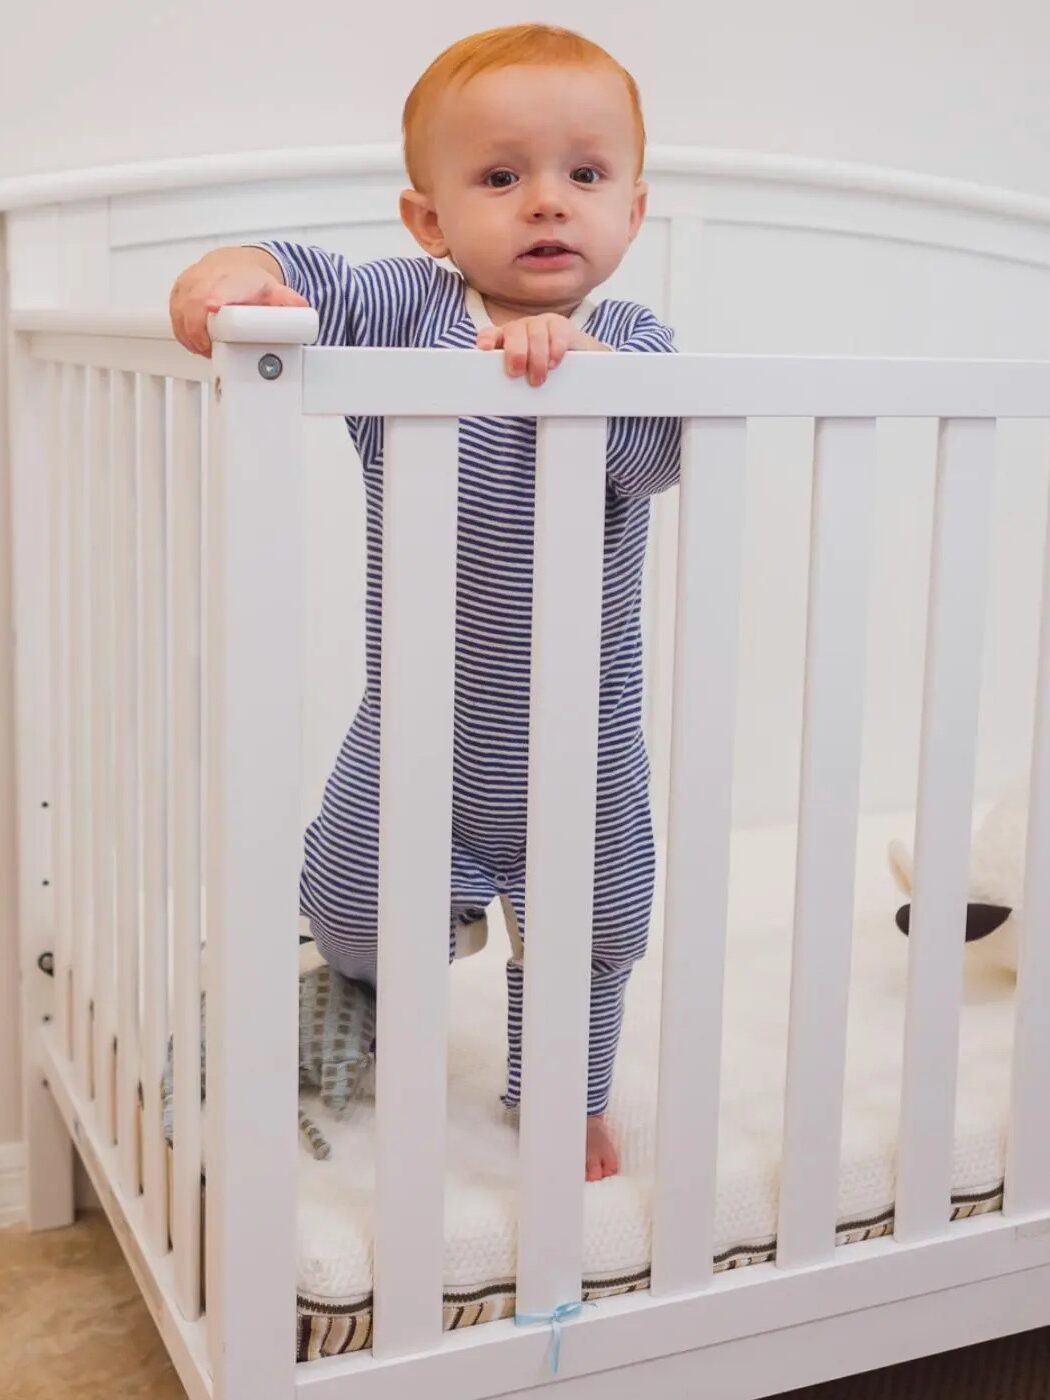 Toddler standing up in a crib, holding onto the rail.